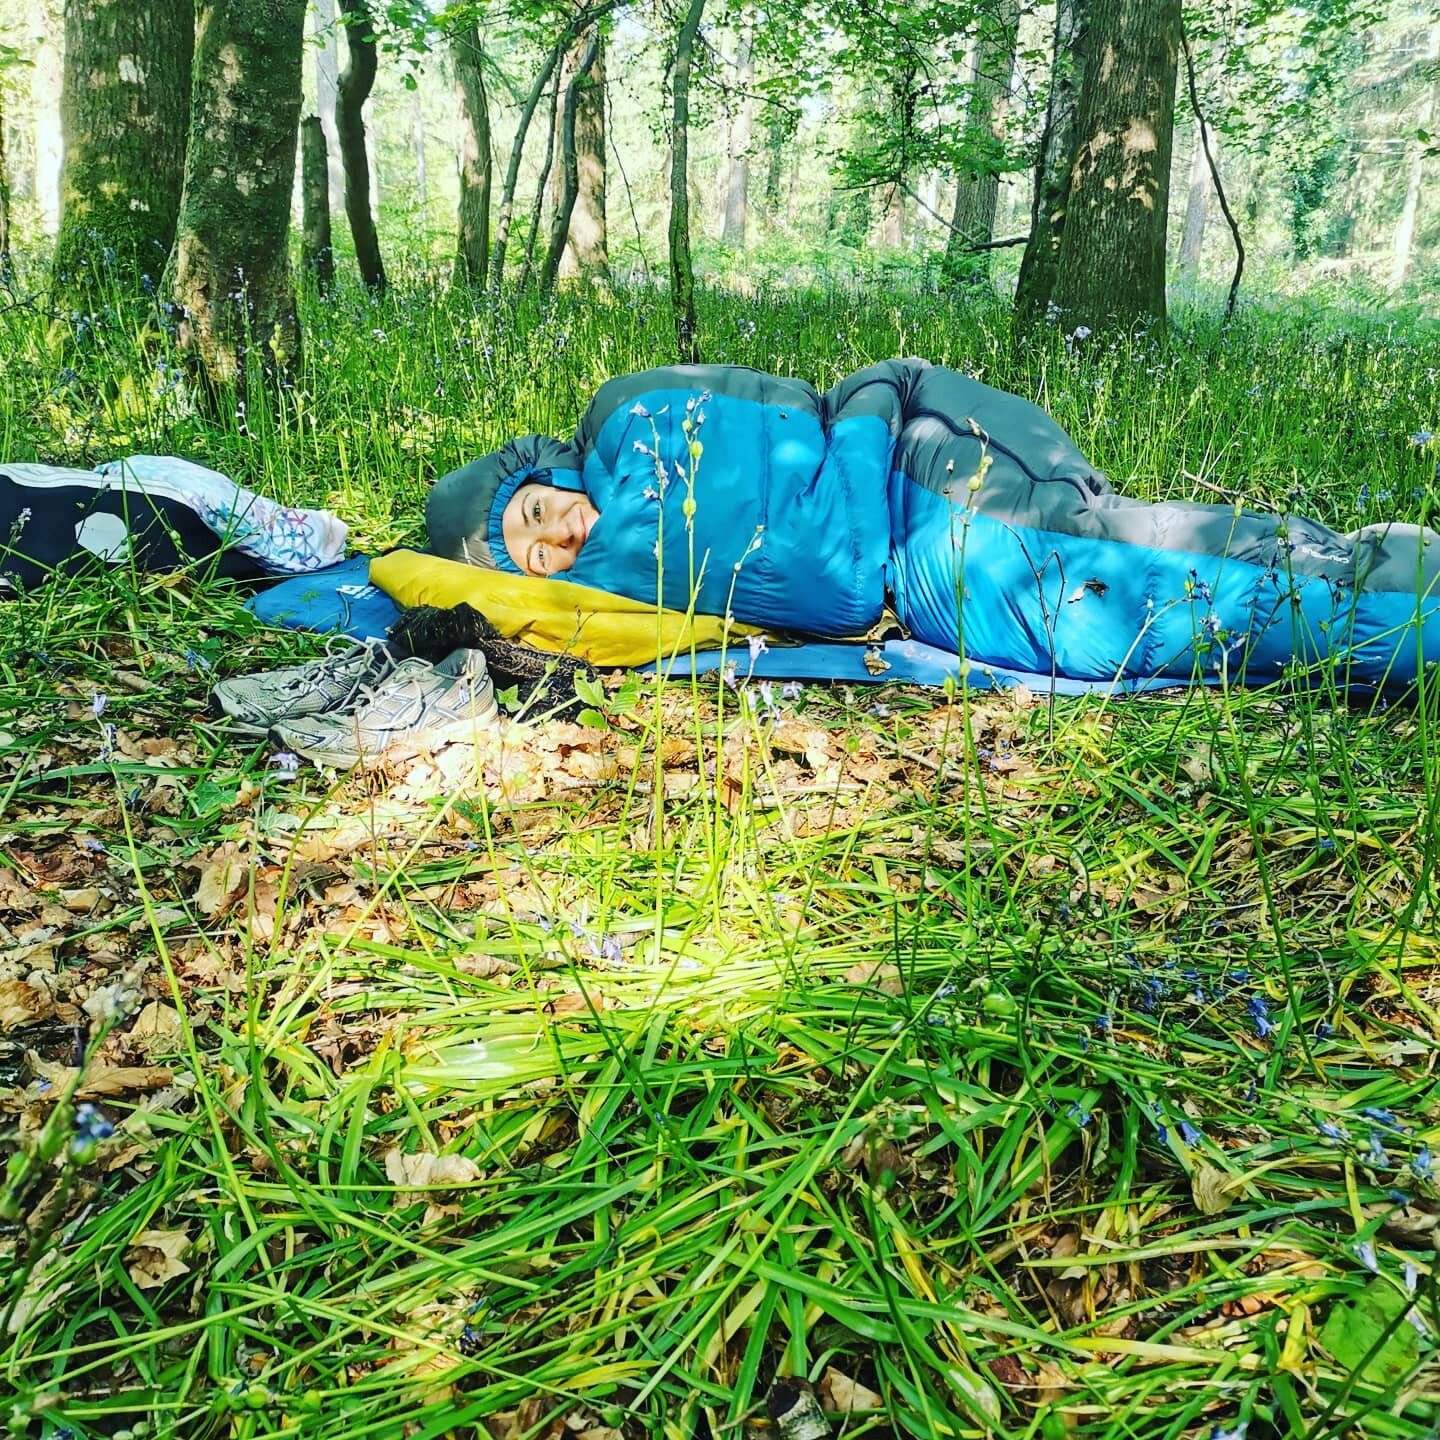 We are not open yet, (thats july 28th) but that won't stop us sleeping outside! Here is hopley trying out the new fangled bluebell sleeping matt.

.
.
#loveshillcamping #loveshill #wildcamp #sleepoutside #bathcampsite #campingbath #timsbury